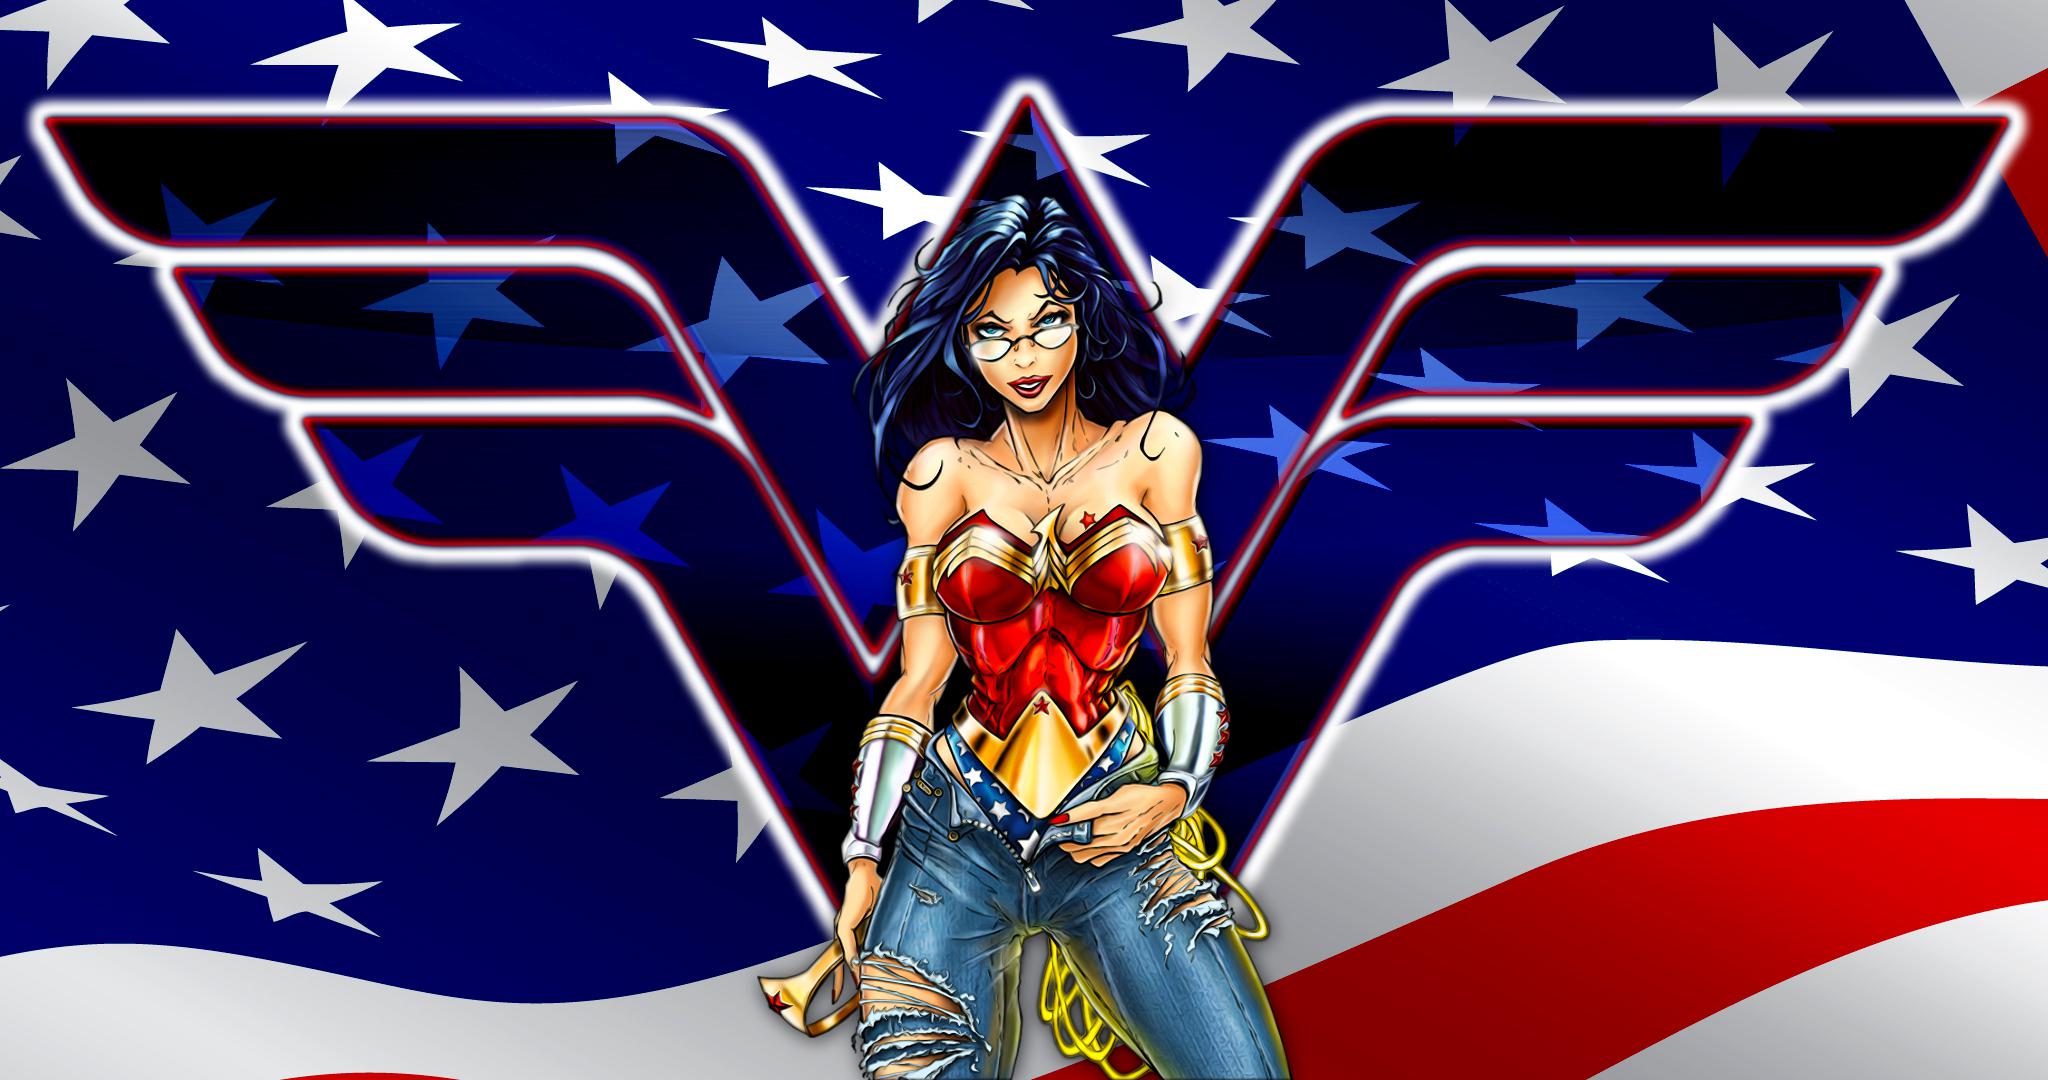 Wonder Woman High Quality And Resolution Wallpaper On